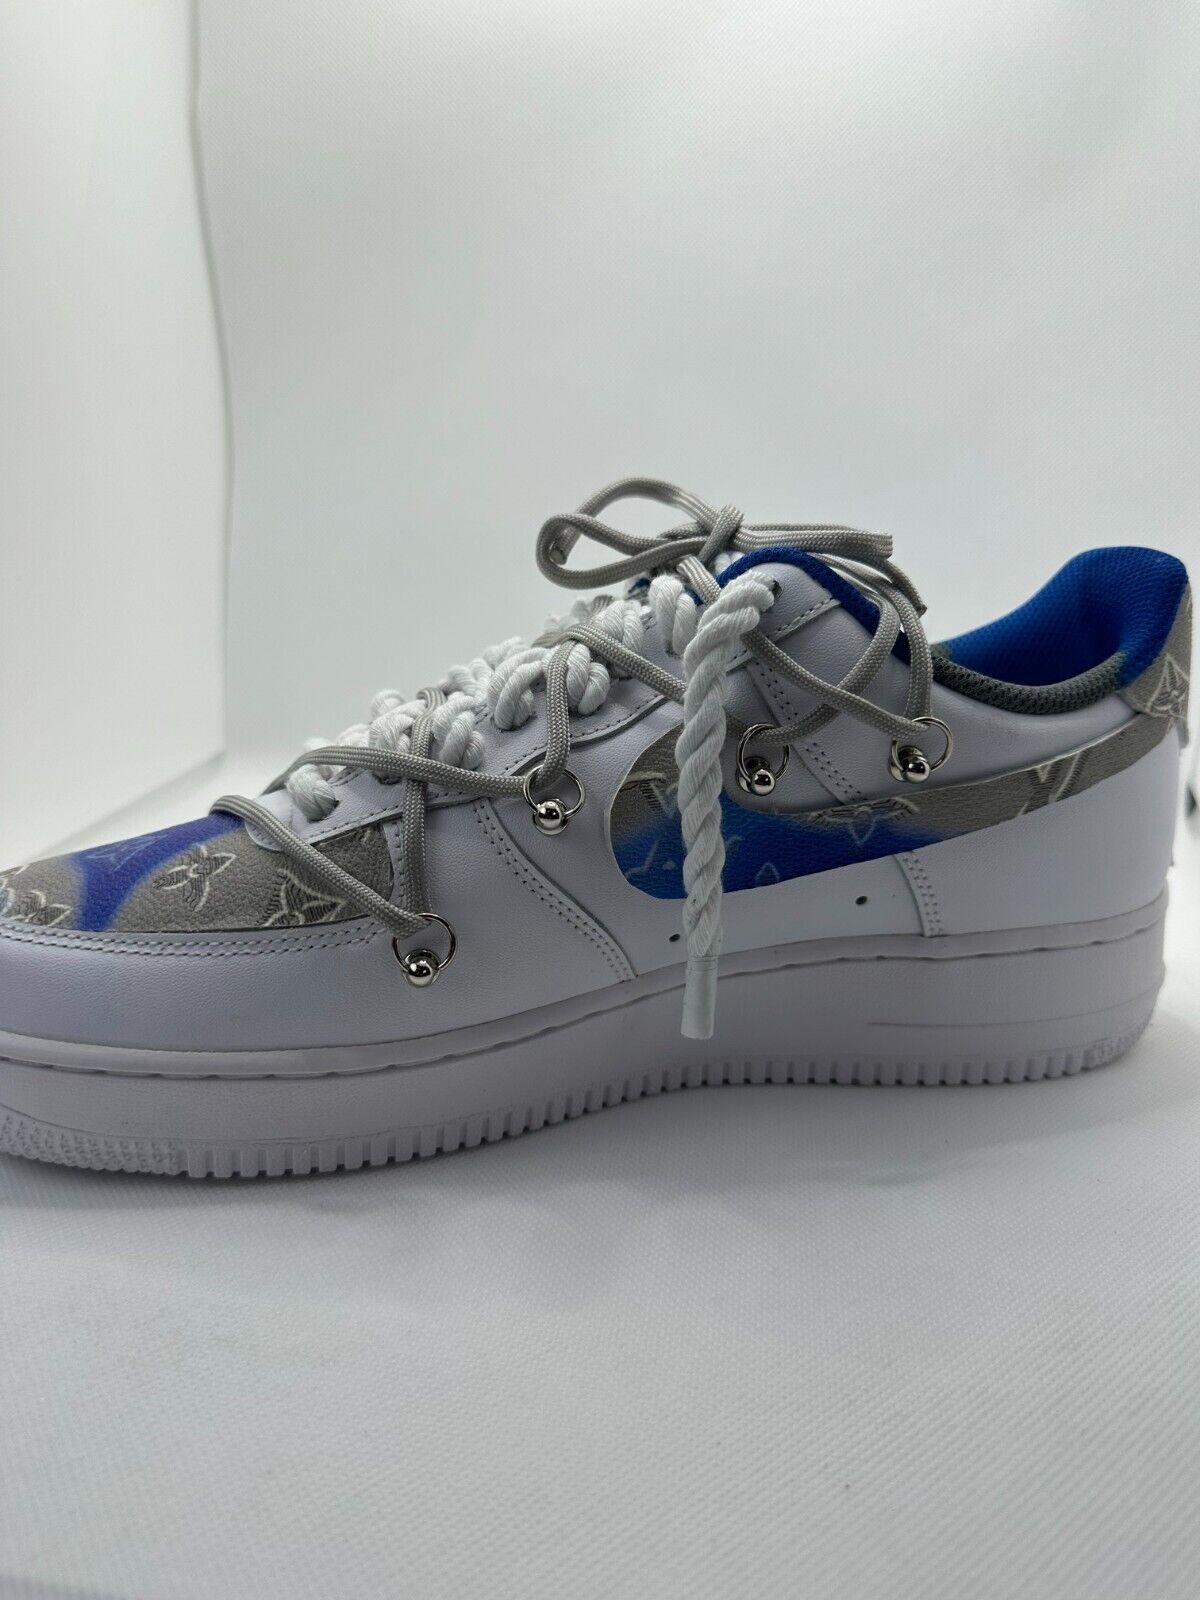 Nike Mens 11 Air Force 1 White LV Collab Rope Lace Customized Sneaker Shoe